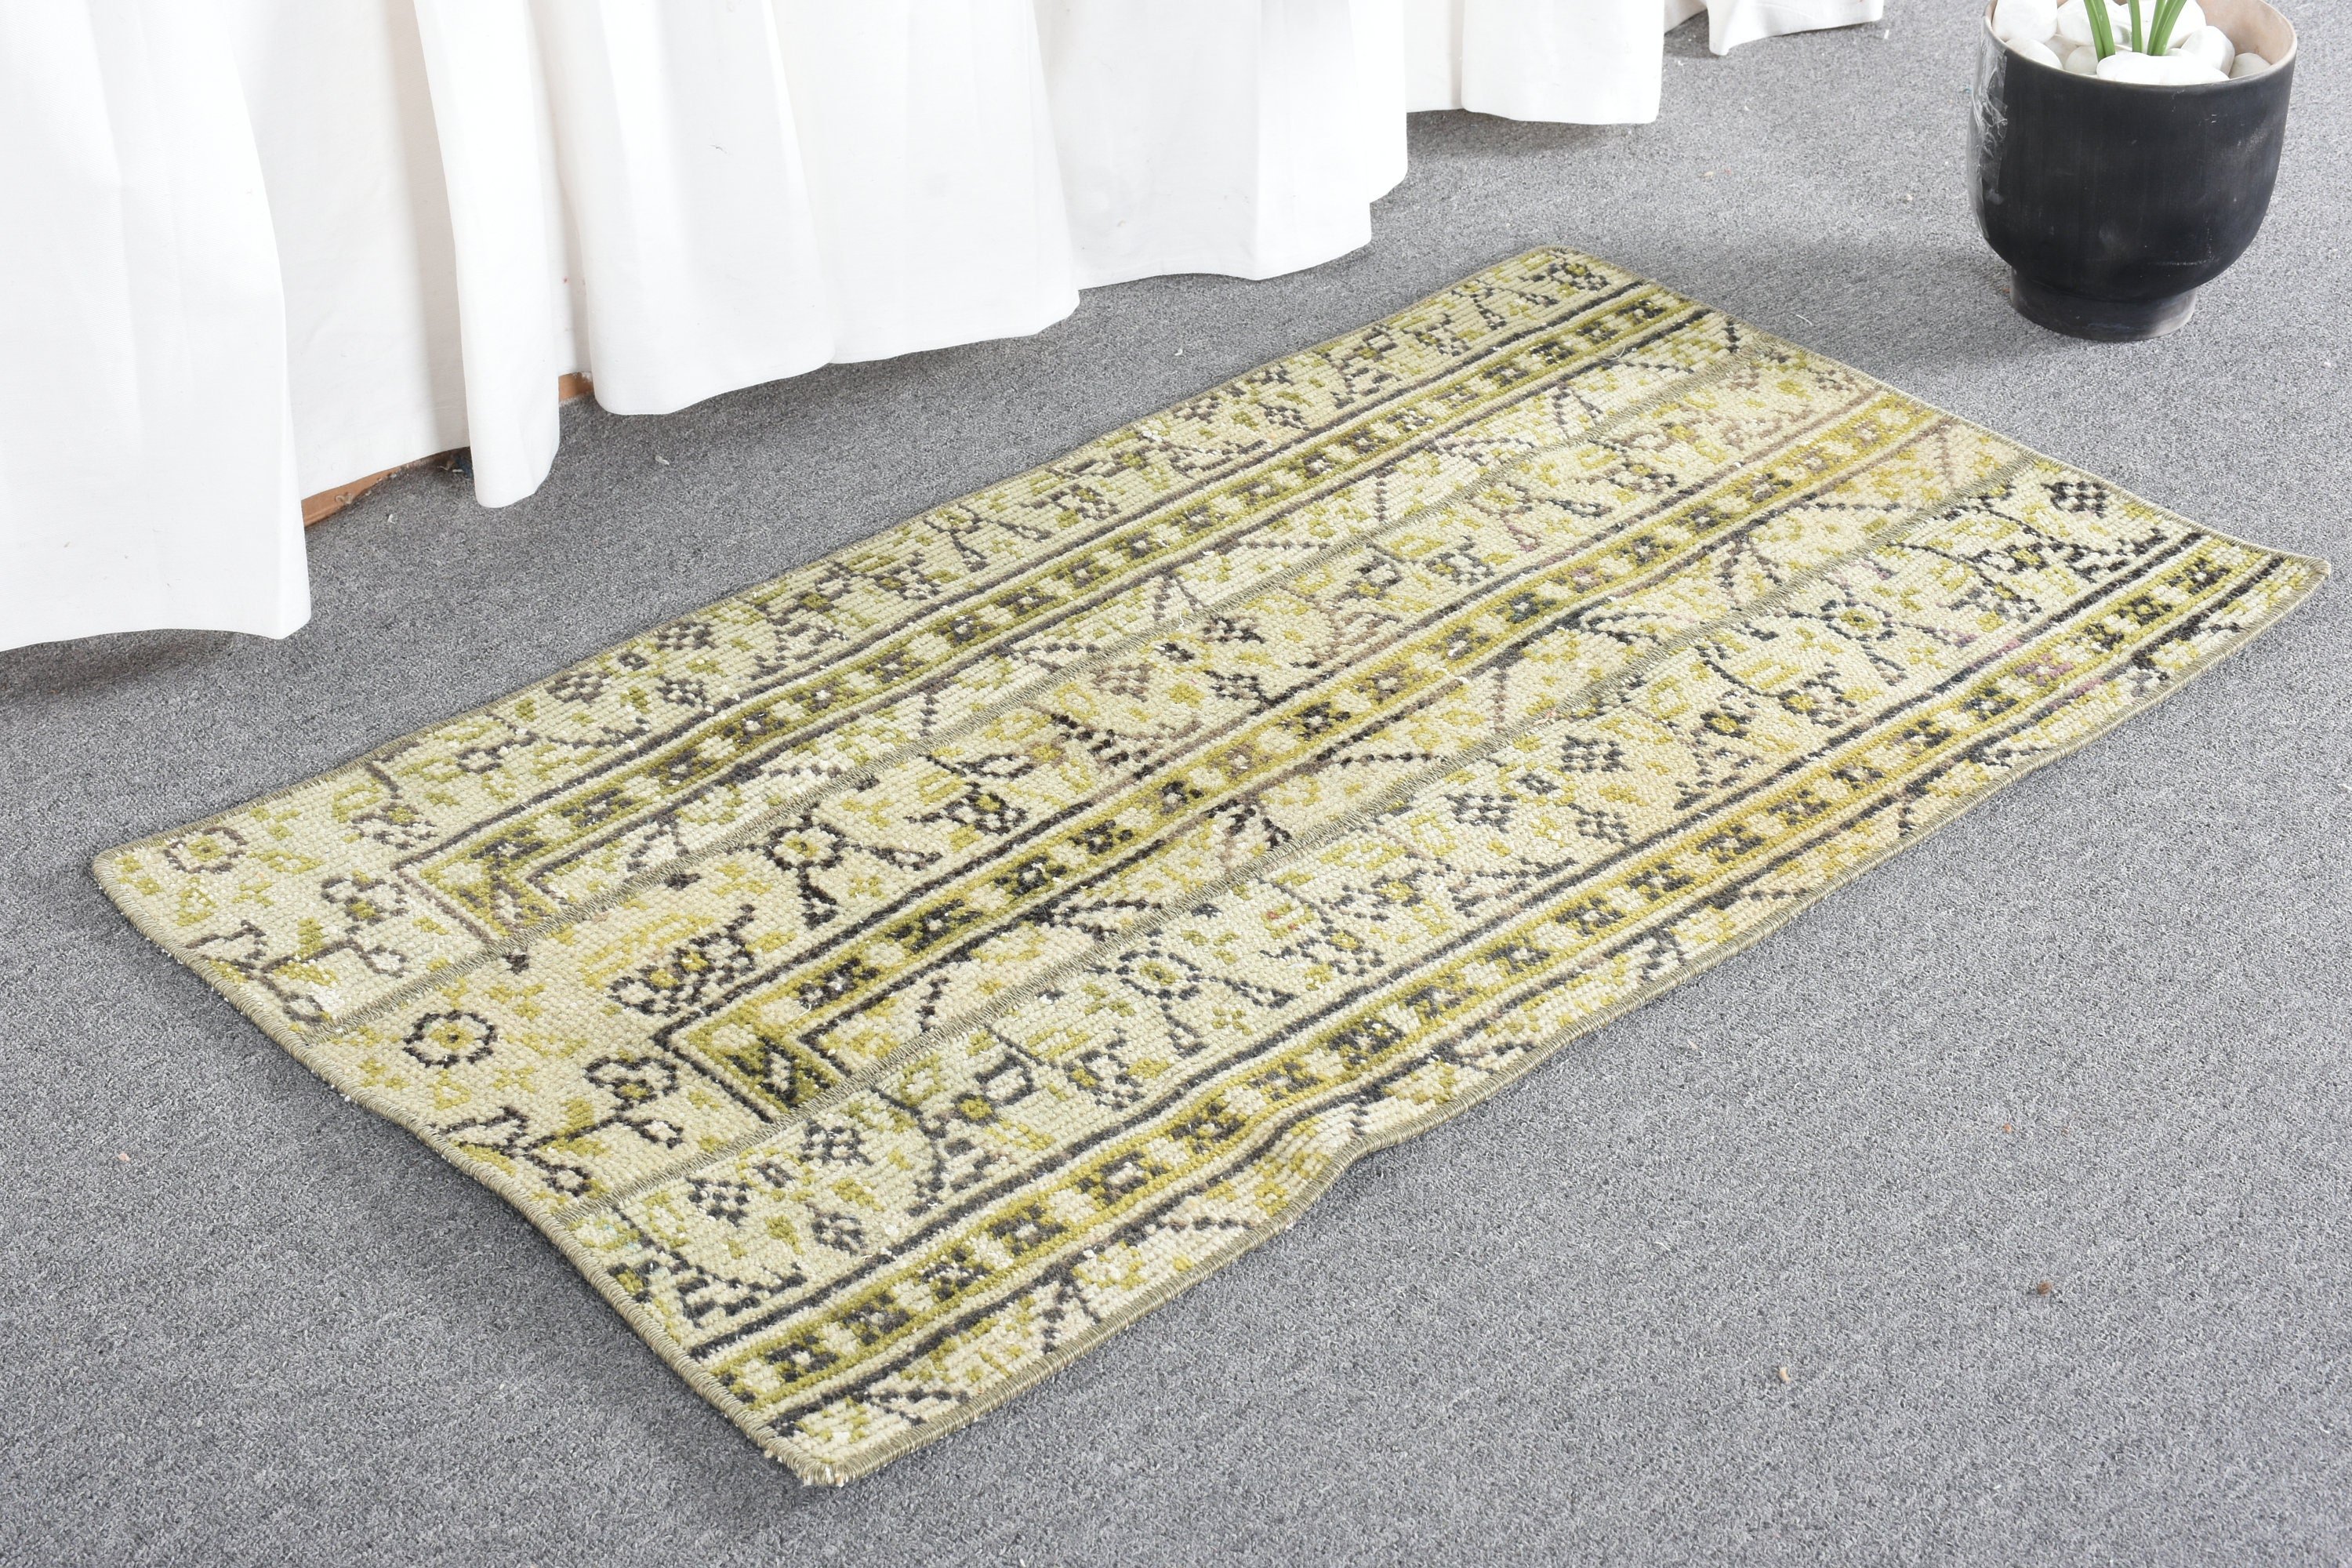 1.8x3.2 ft Small Rugs, Vintage Rug, Turkish Rugs, Green Kitchen Rug, Wool Rug, Wall Hanging Rug, Rugs for Wall Hanging